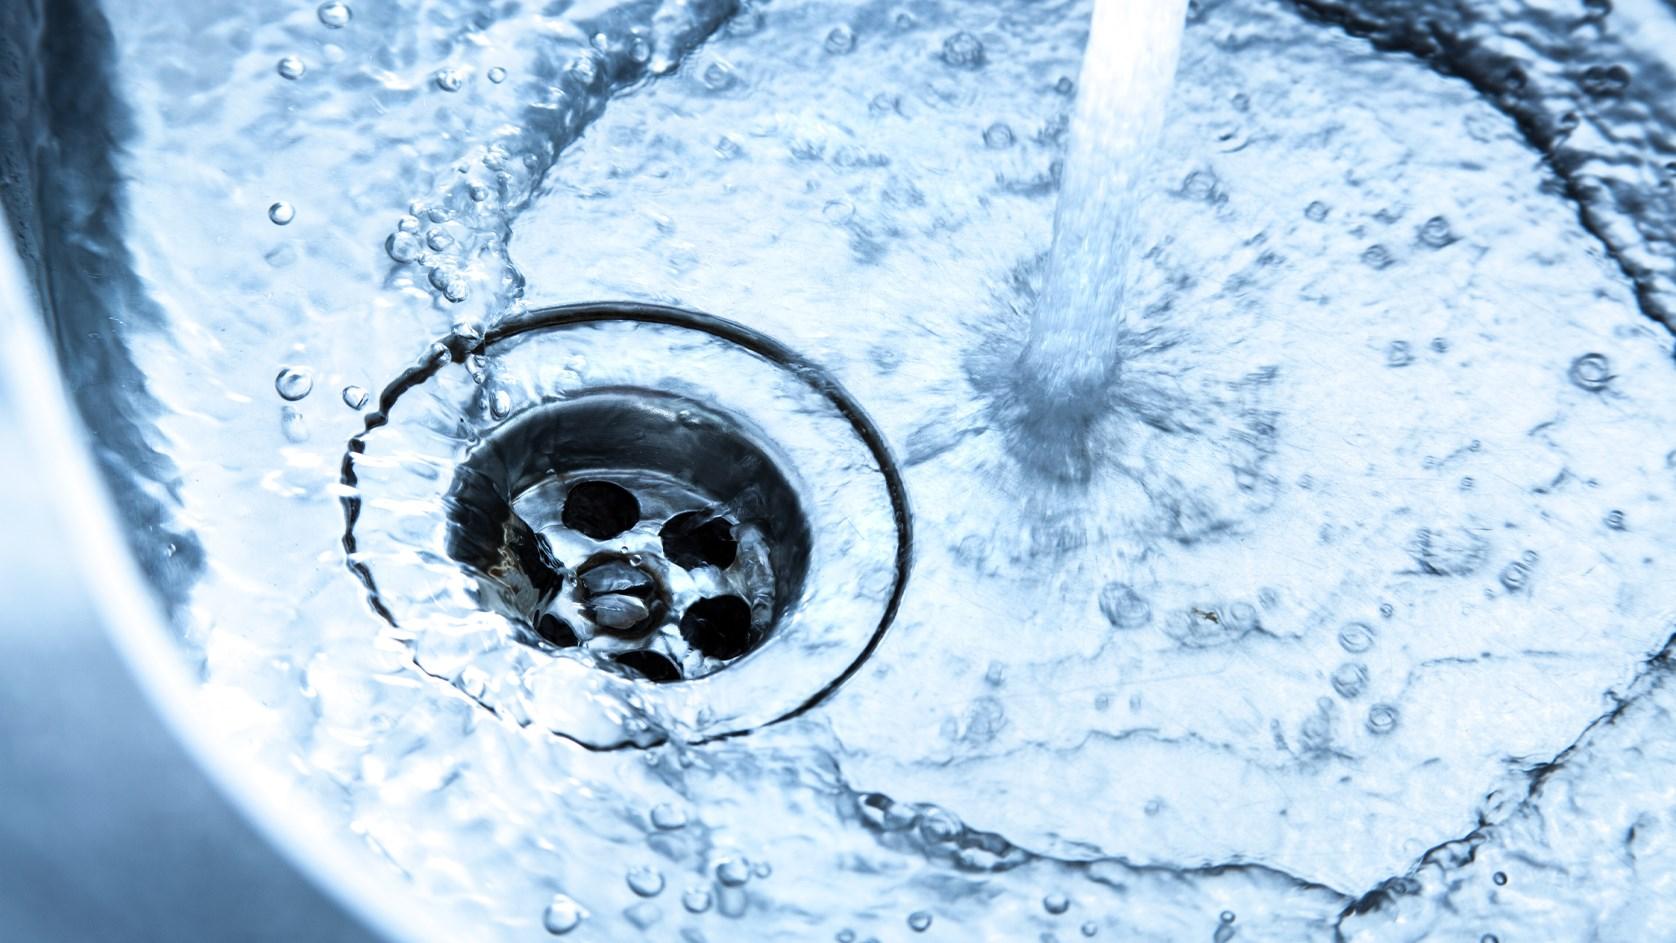 Water going down a plughole